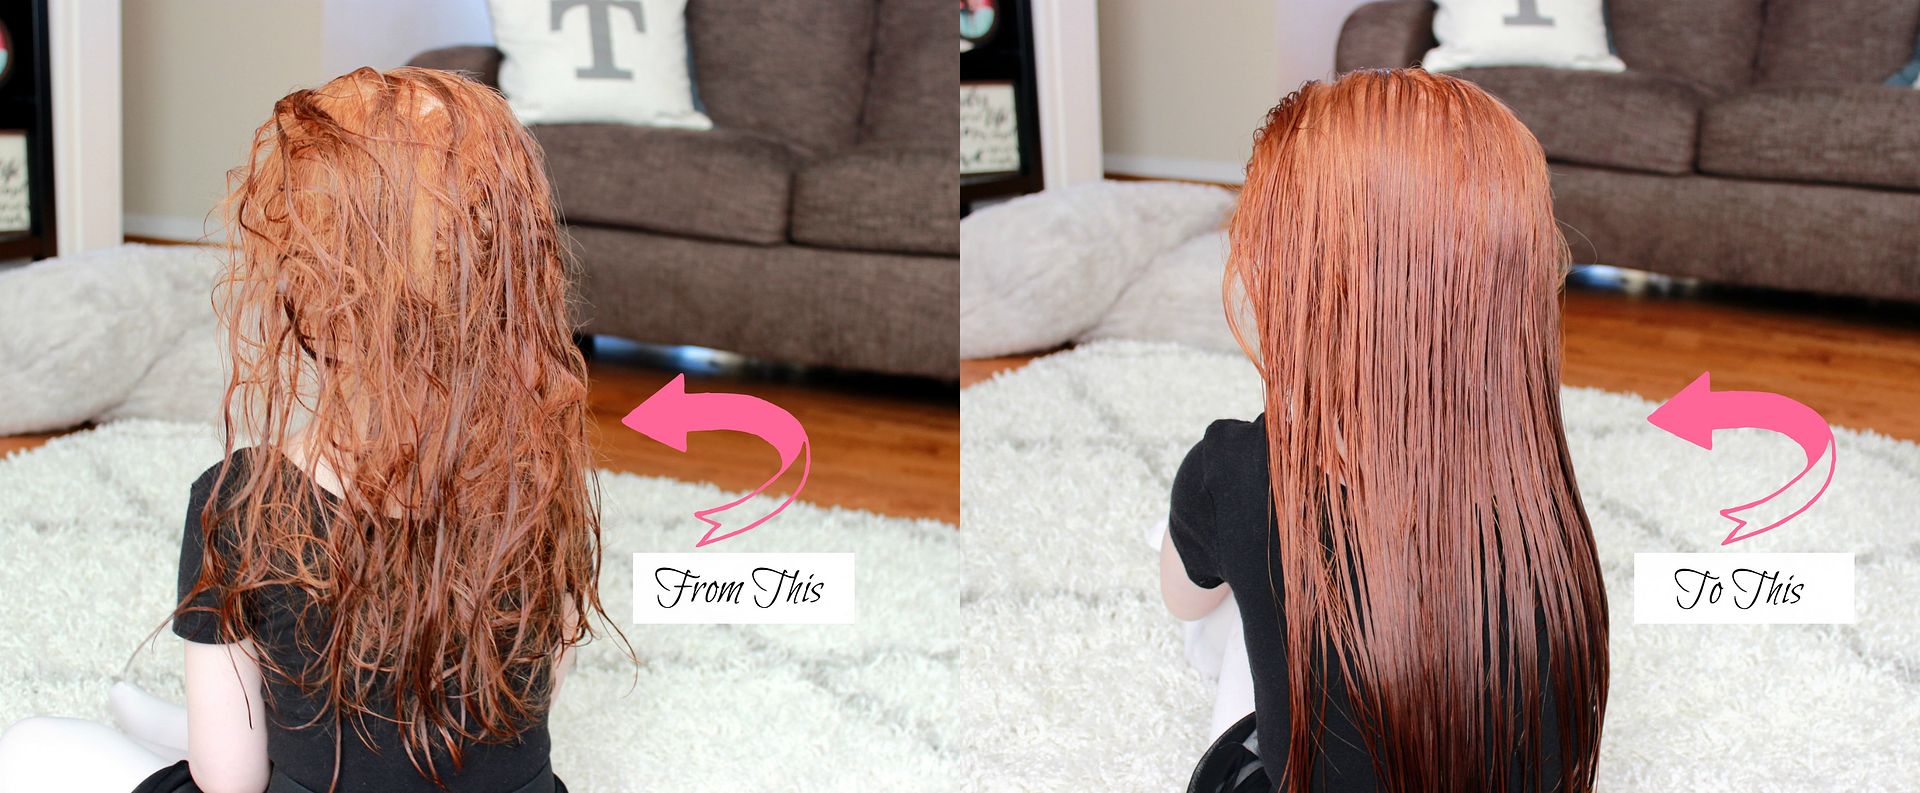 How to Detangle and Style Your Child's Hair Without Causing Damage - wide 2